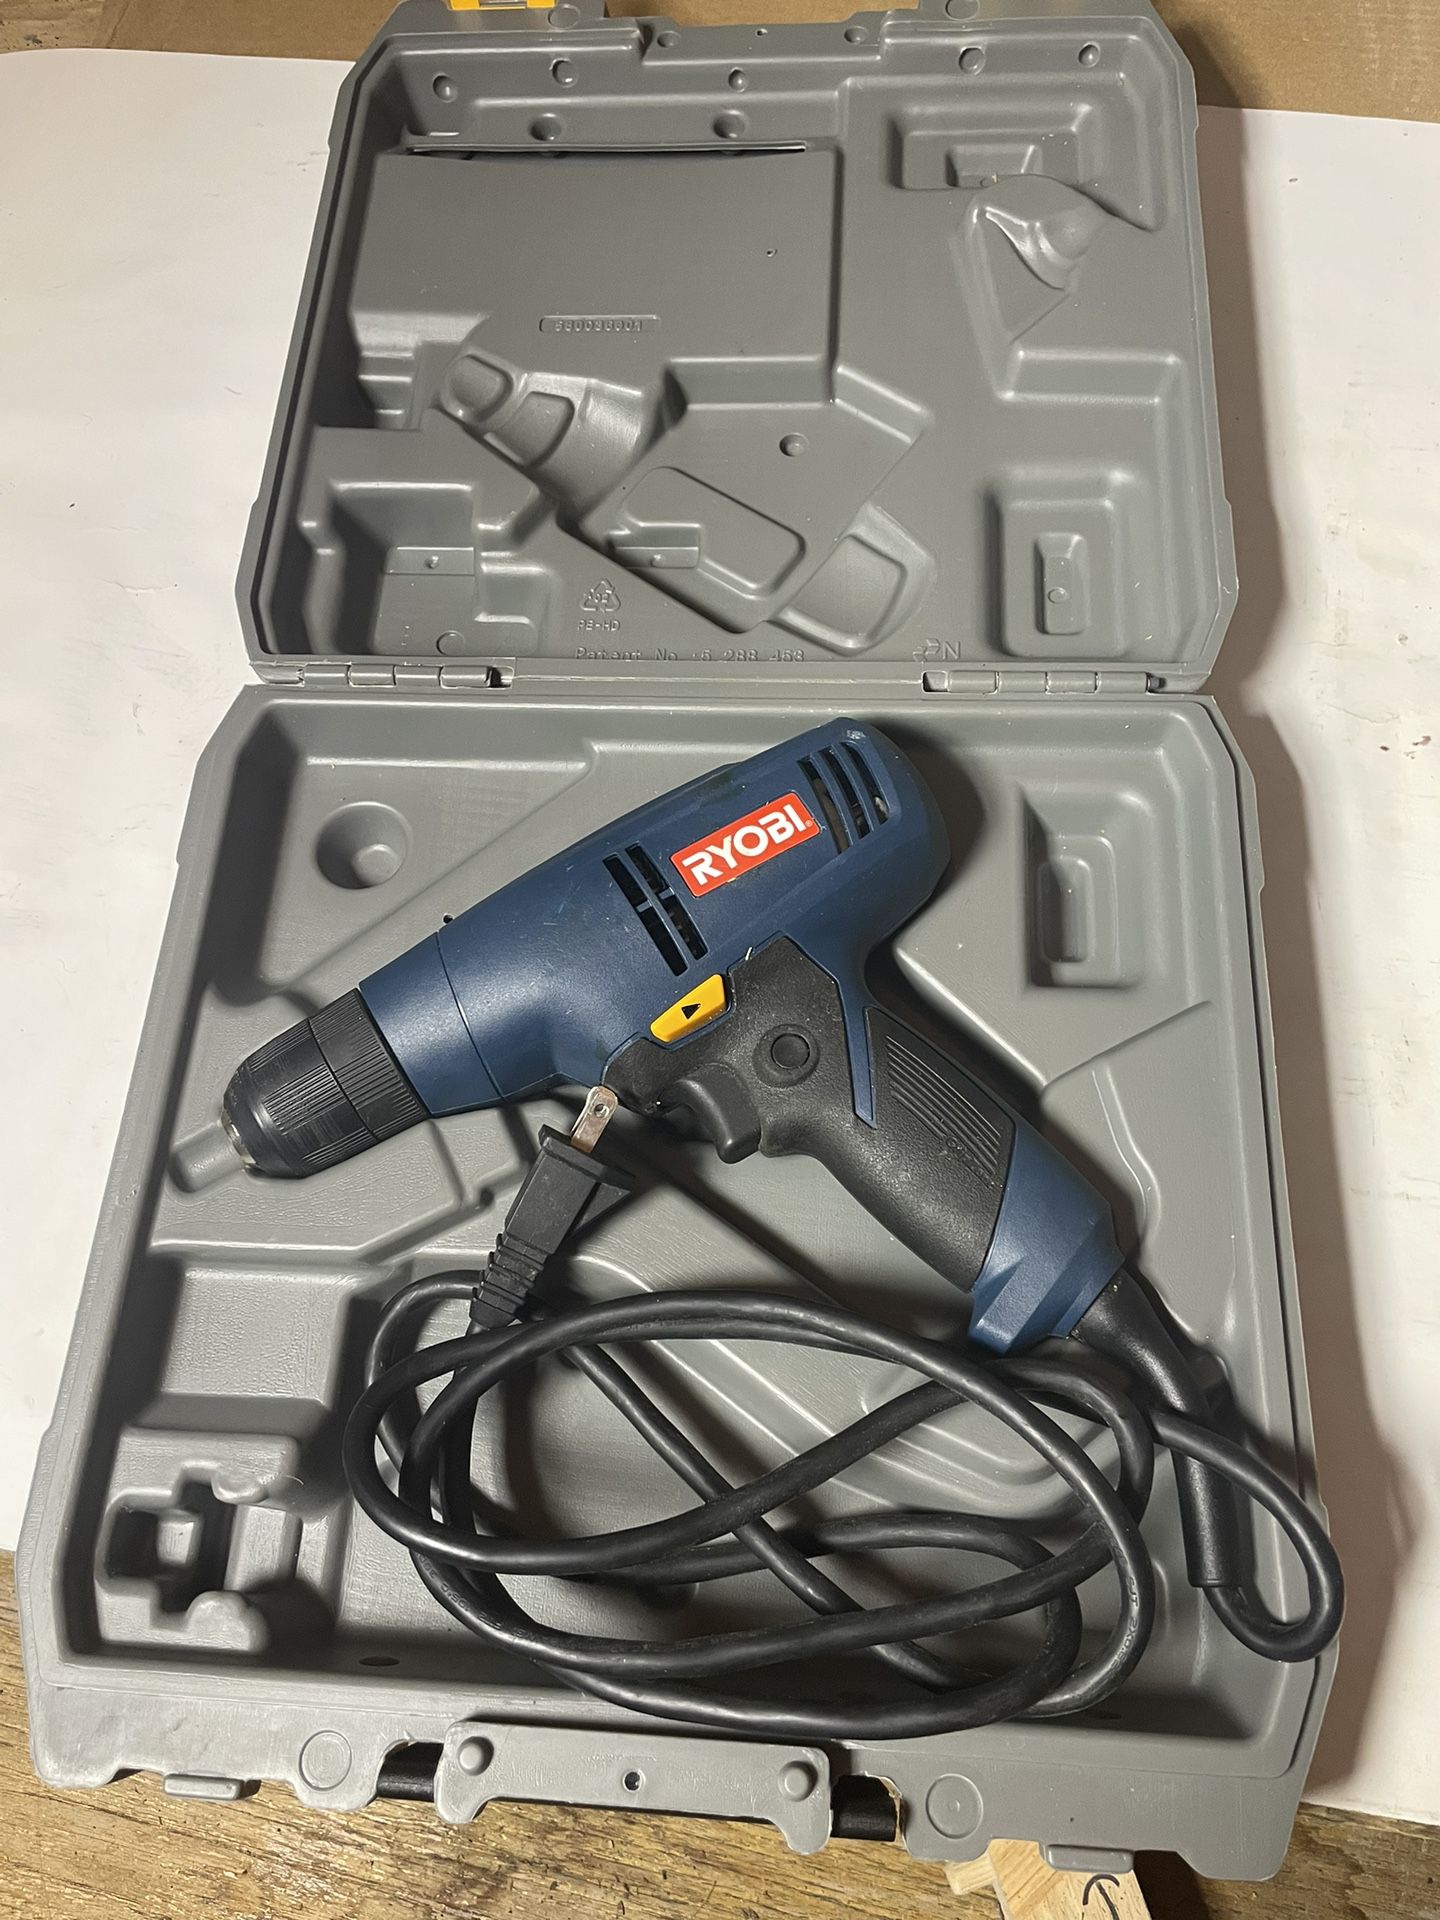 RYOBI D42 3/8" 120V CORDED DRILL/DRIVER with HARD CASE